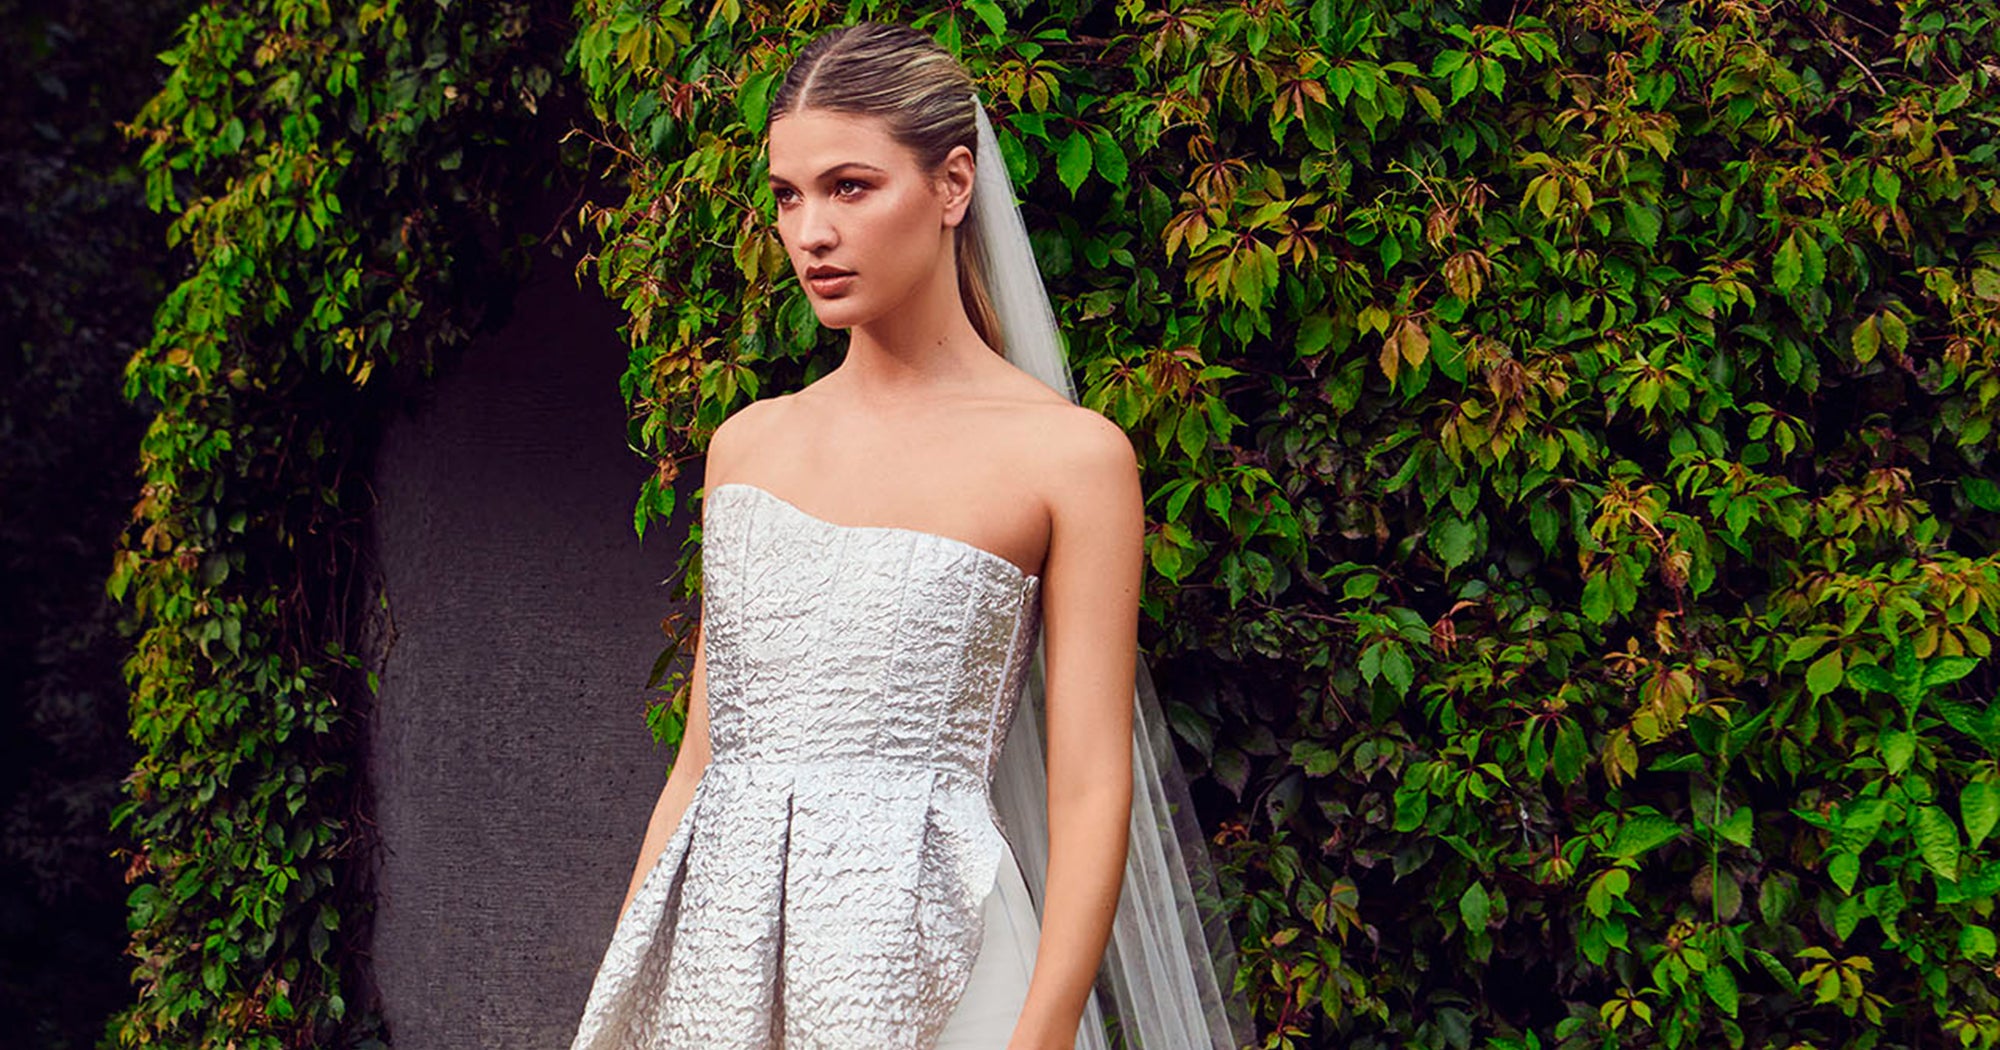 14 Non-Traditional Wedding Looks For Modern Brides